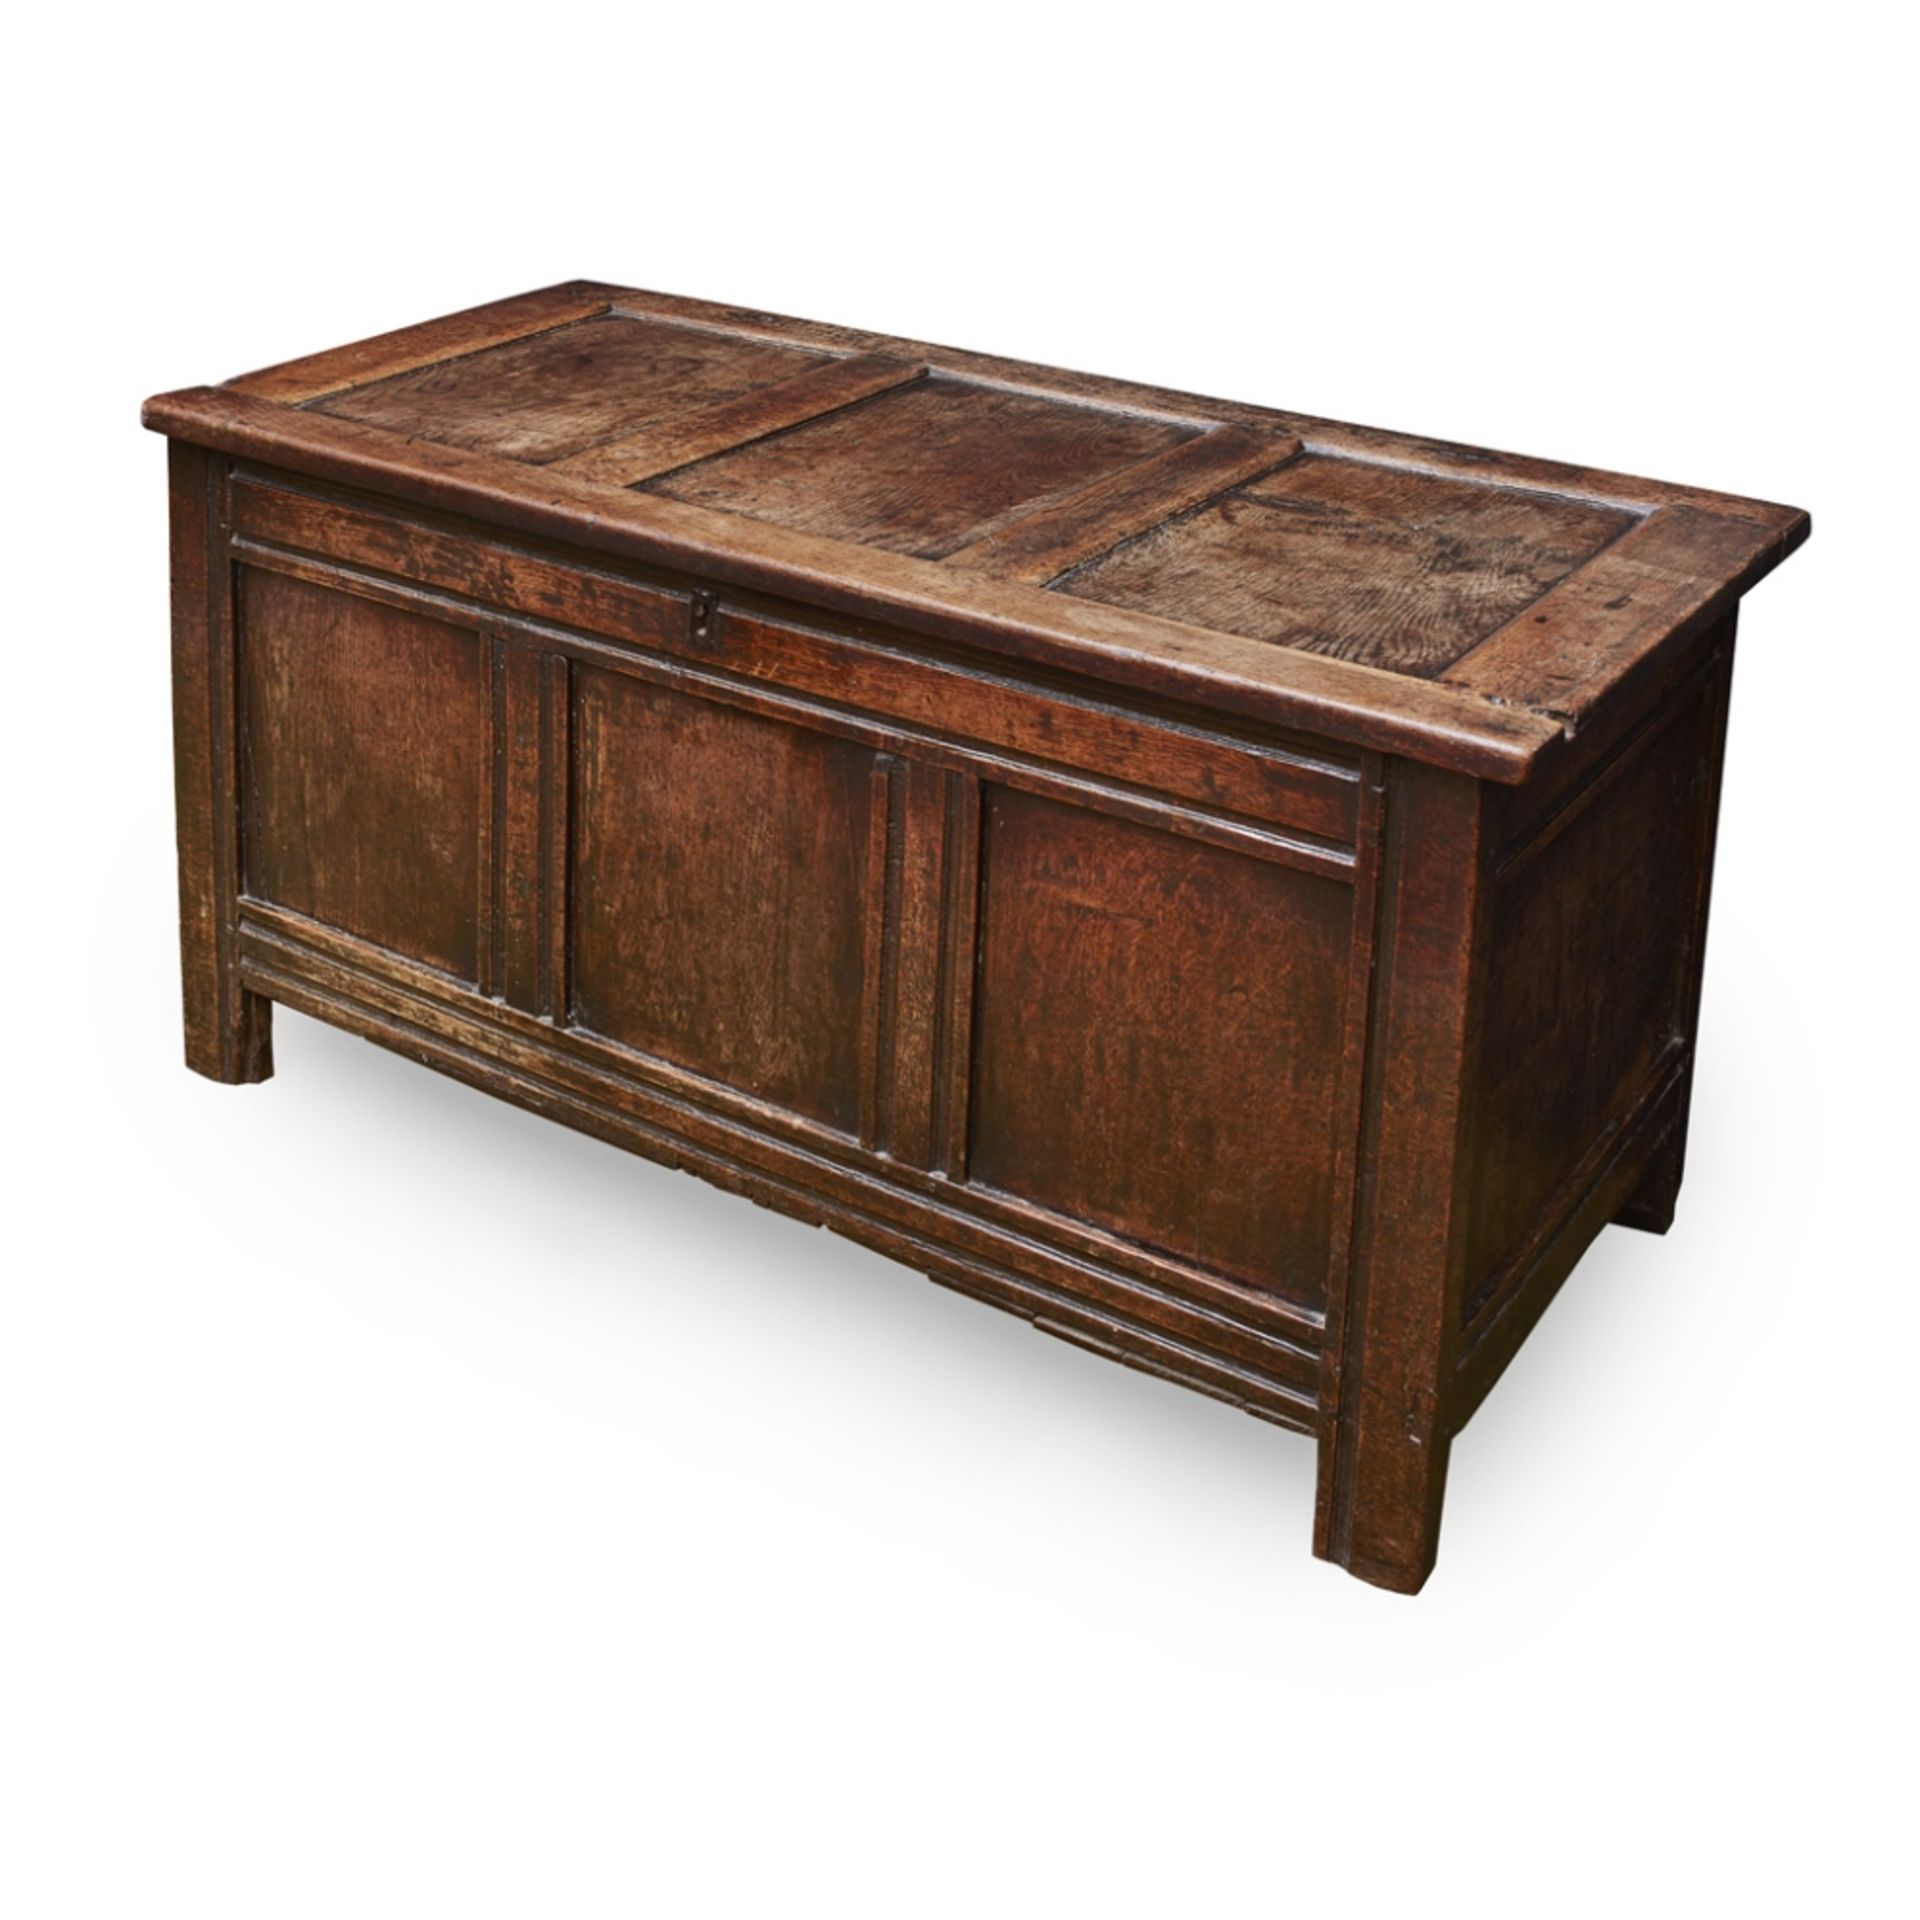 ENGLISH OAK COFFER LATE 17TH/EARLY 18TH CENTURY the triple-panelled top above a triple-panelled